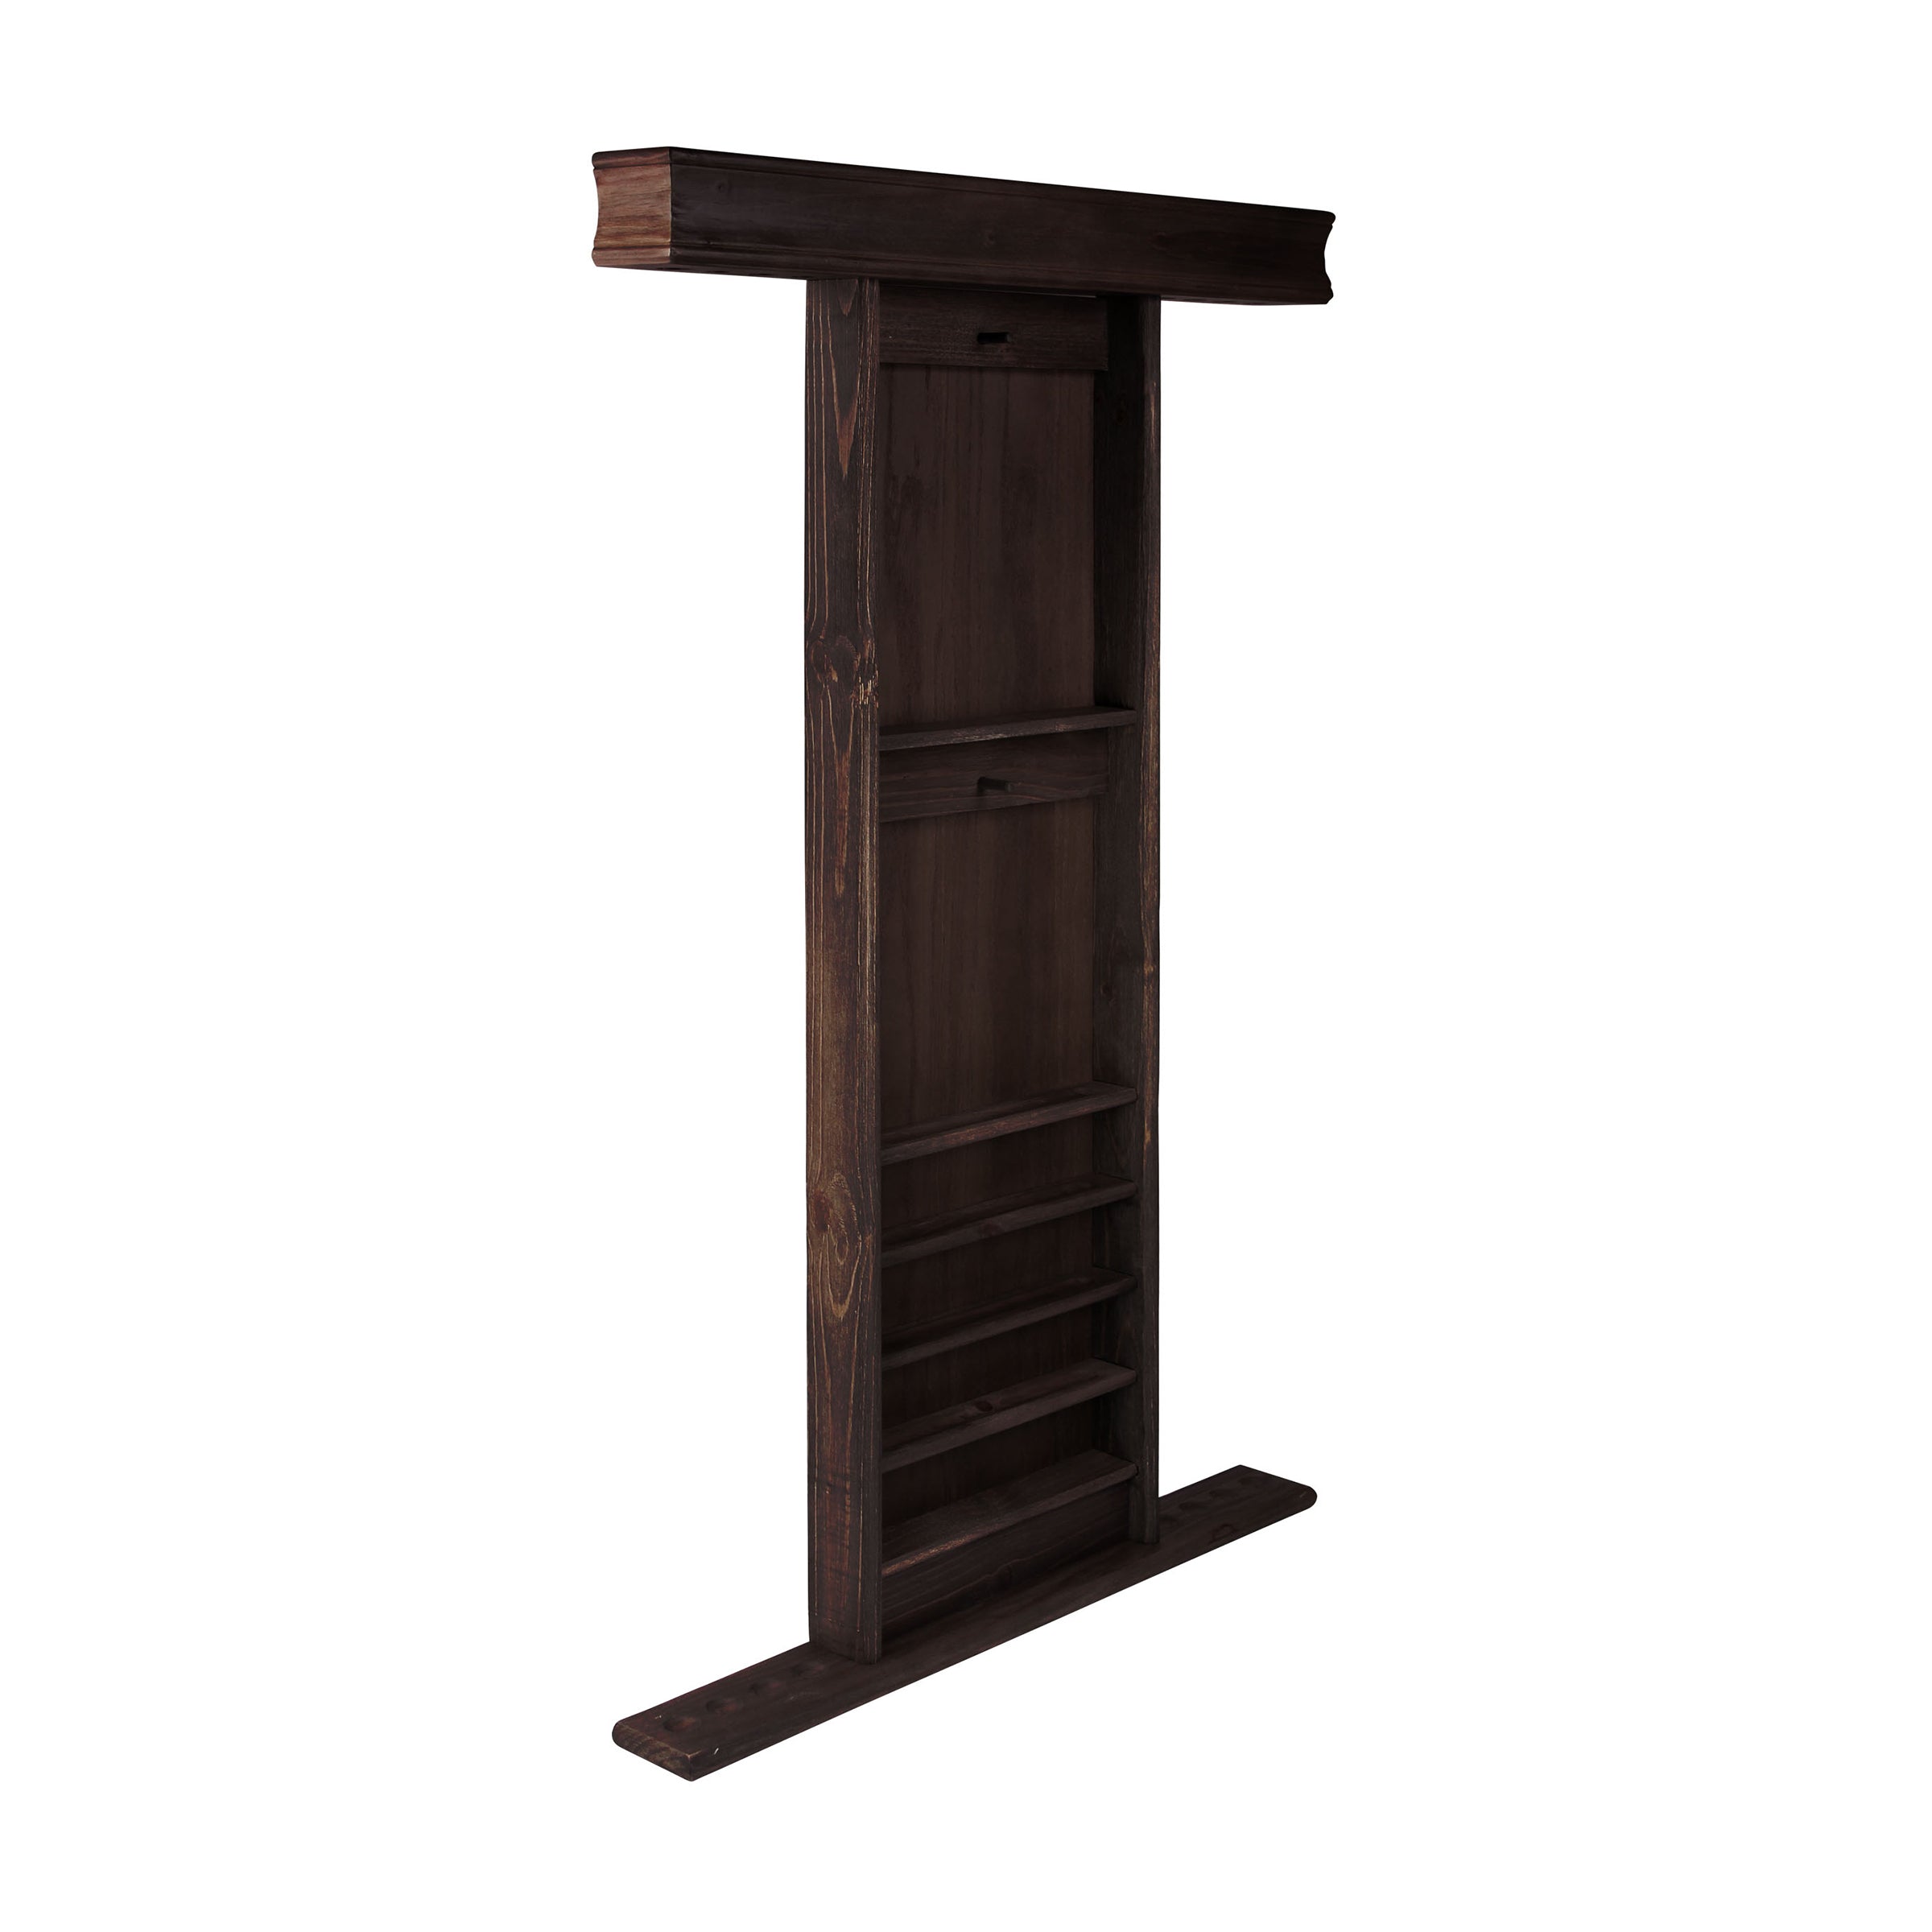 IMPERIAL DELUXE WALL RACK, WEATHERED DARK CHESTNUT